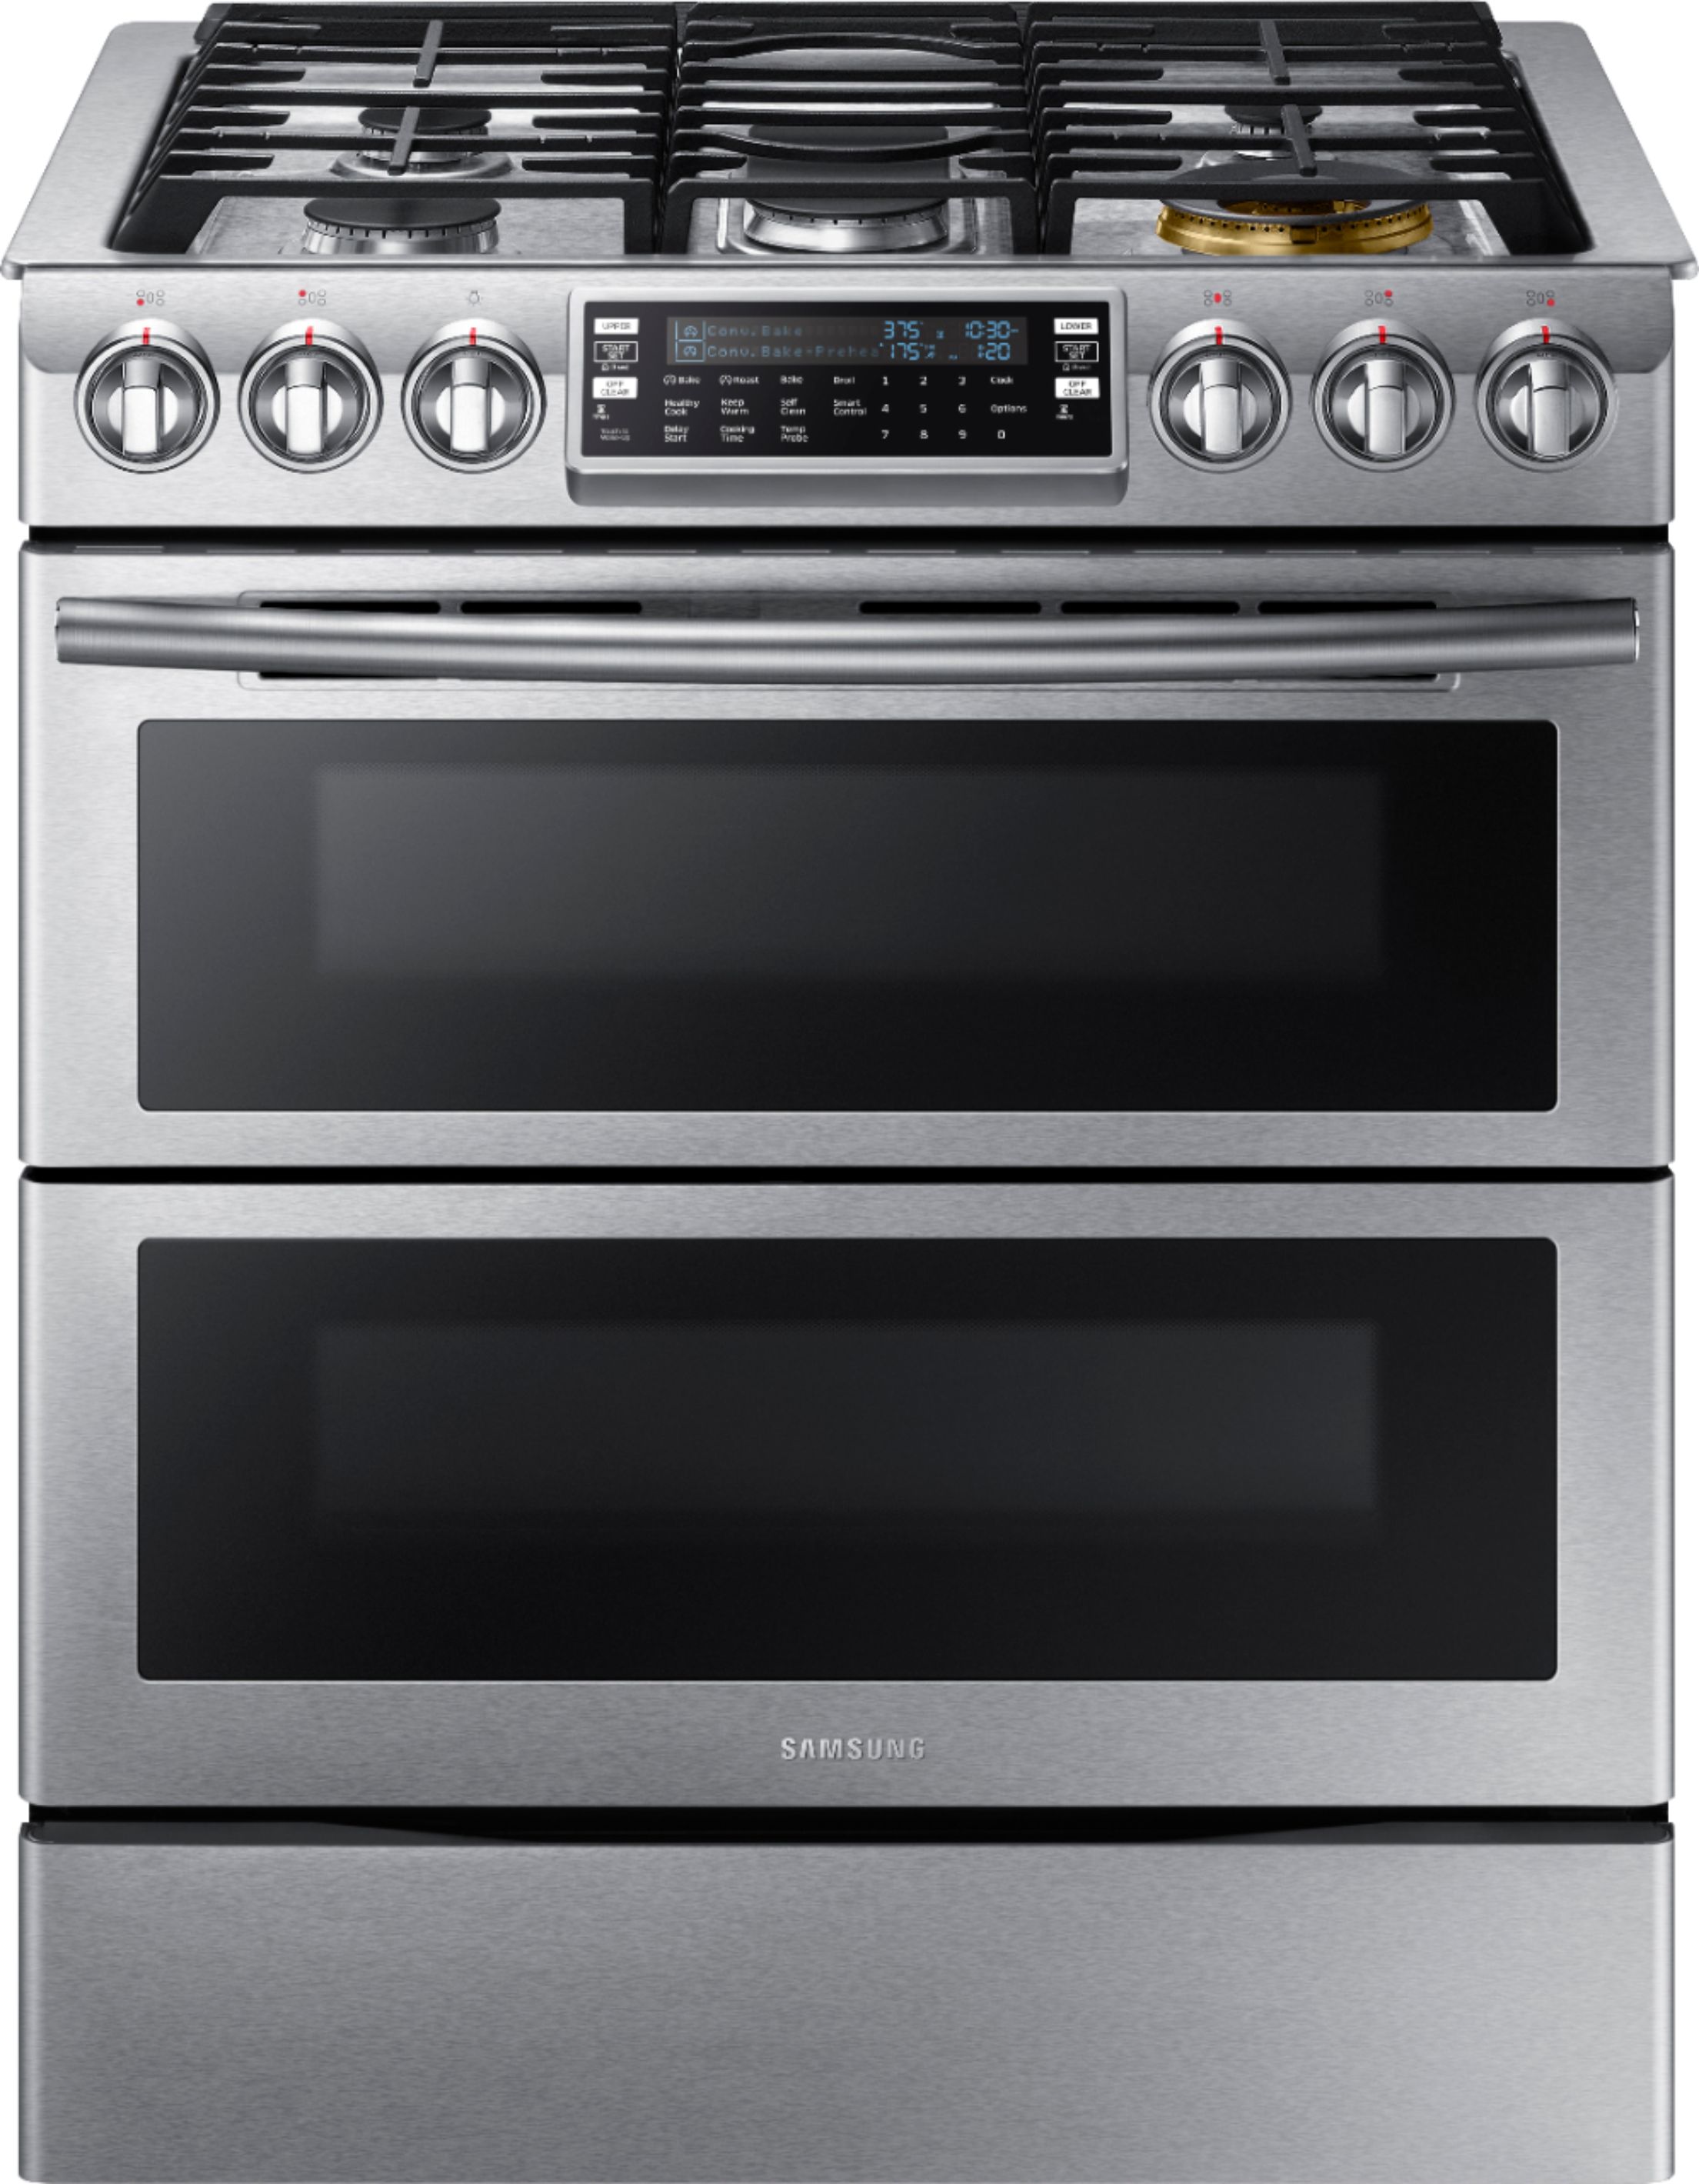 Samsung – Flex Duo™ 5.8 Cu. Ft. Self-Cleaning Slide-In Gas Convection Range – Stainless steel